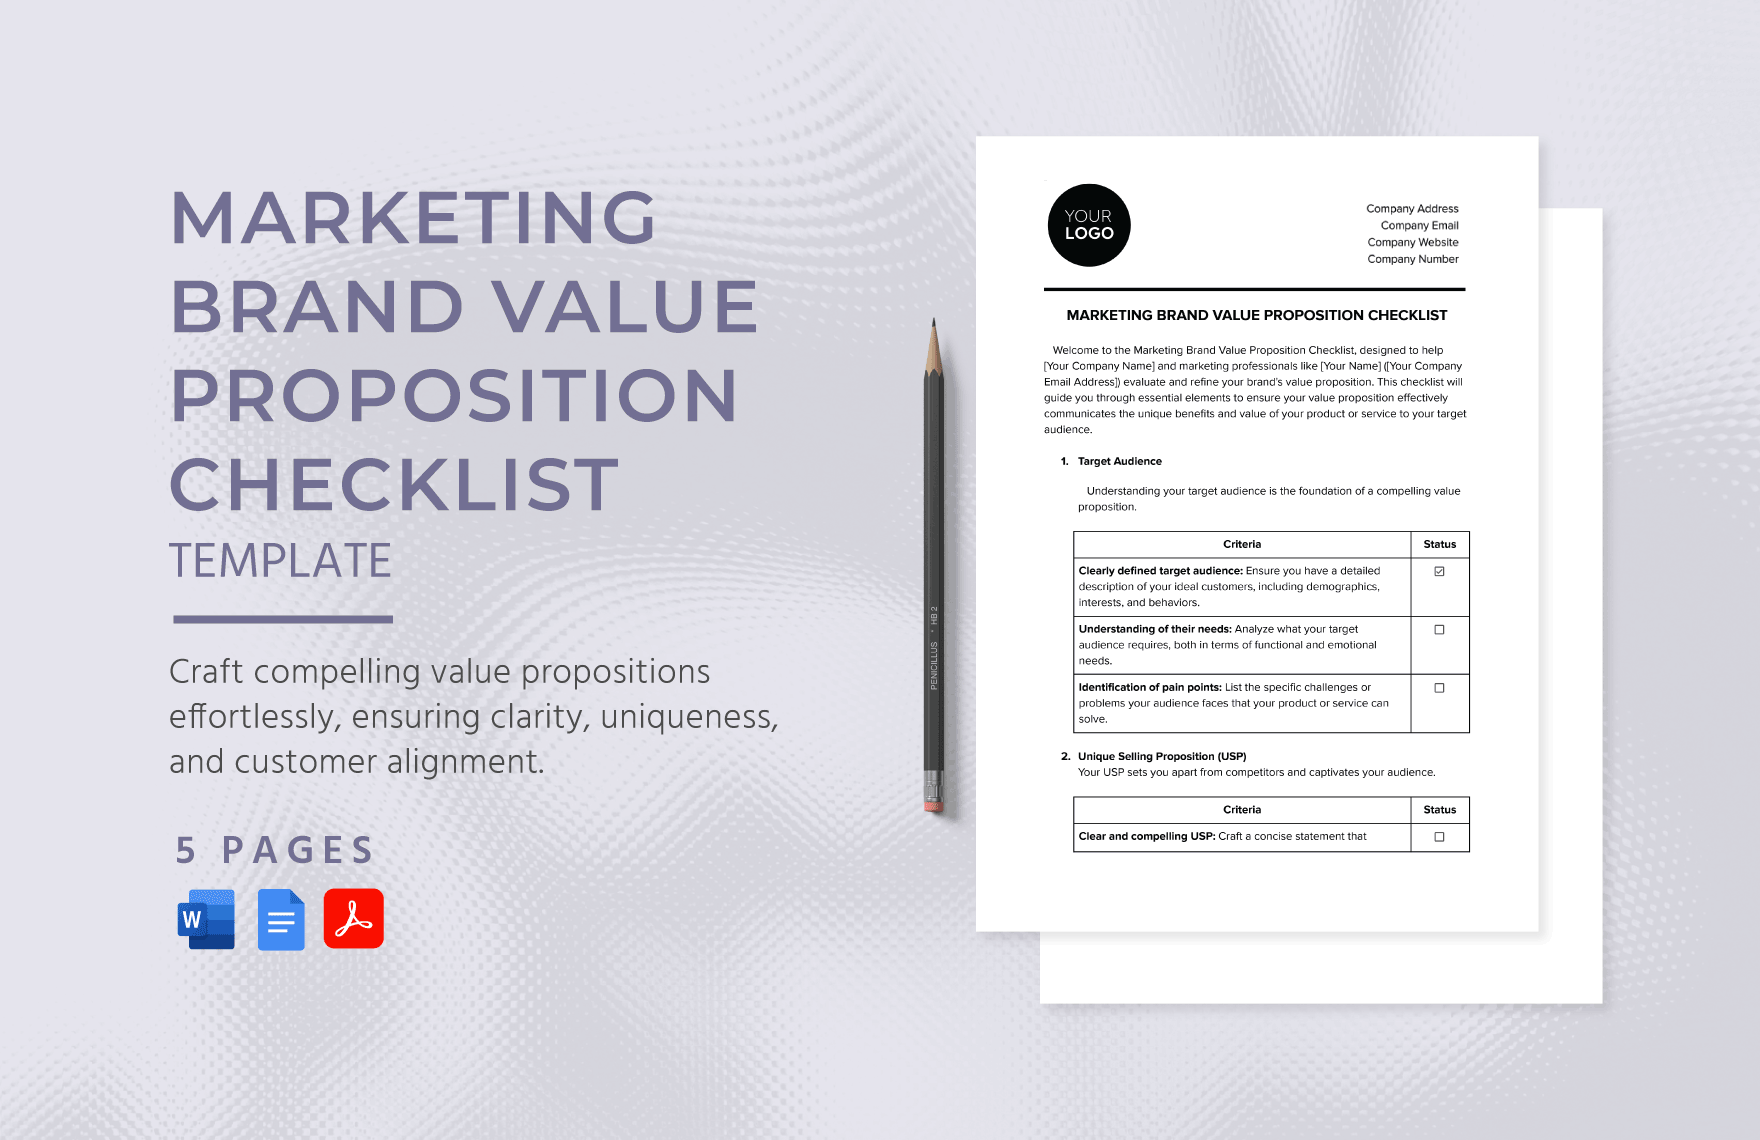 Marketing Brand Value Proposition Checklist Template in Word, Google Docs, PDF